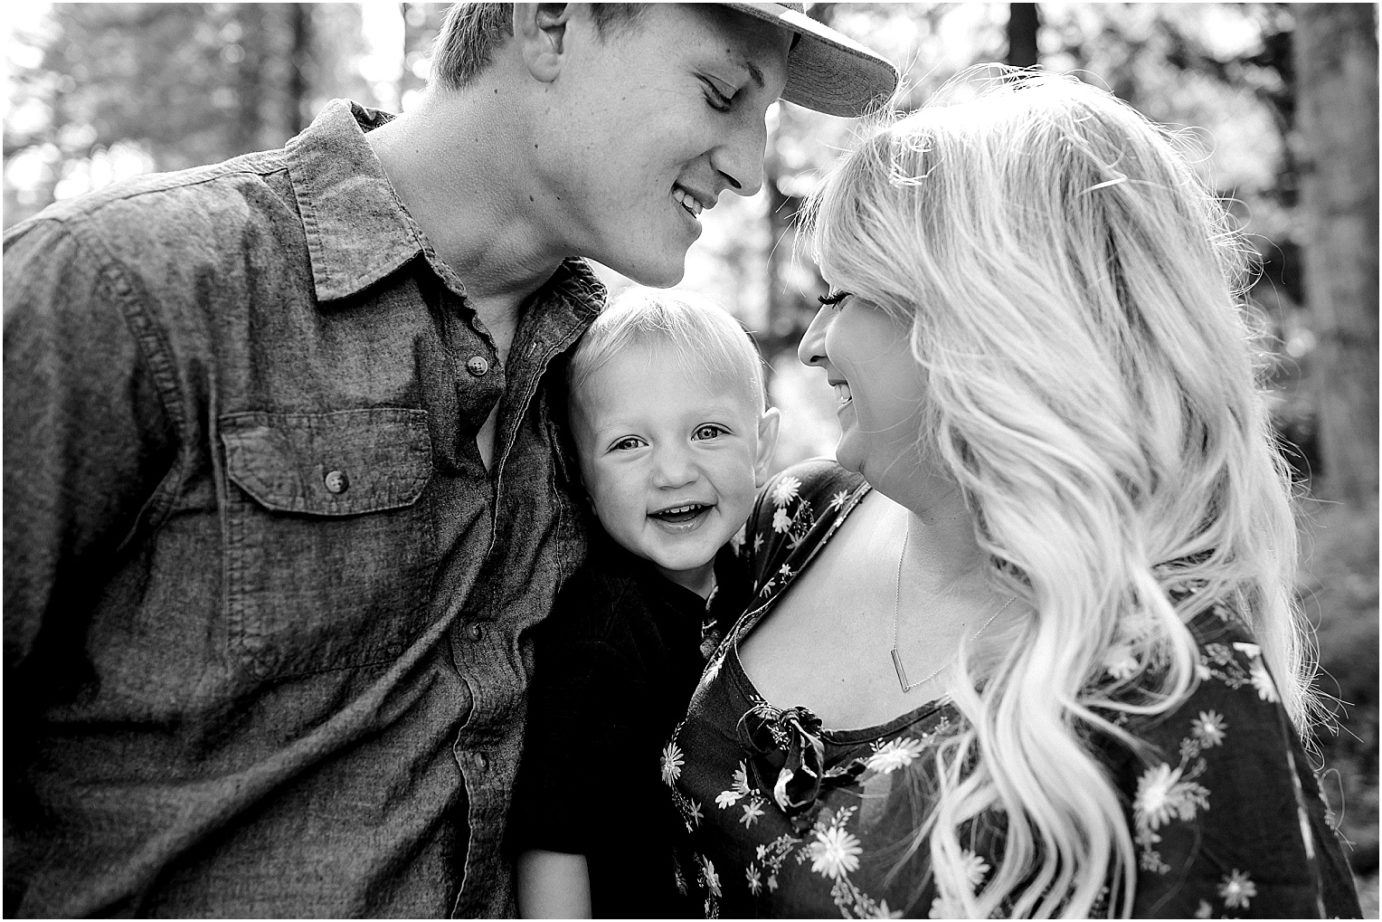 Ellensburg engagement session Ellensburg photographer Clay and Hayley couple with their son